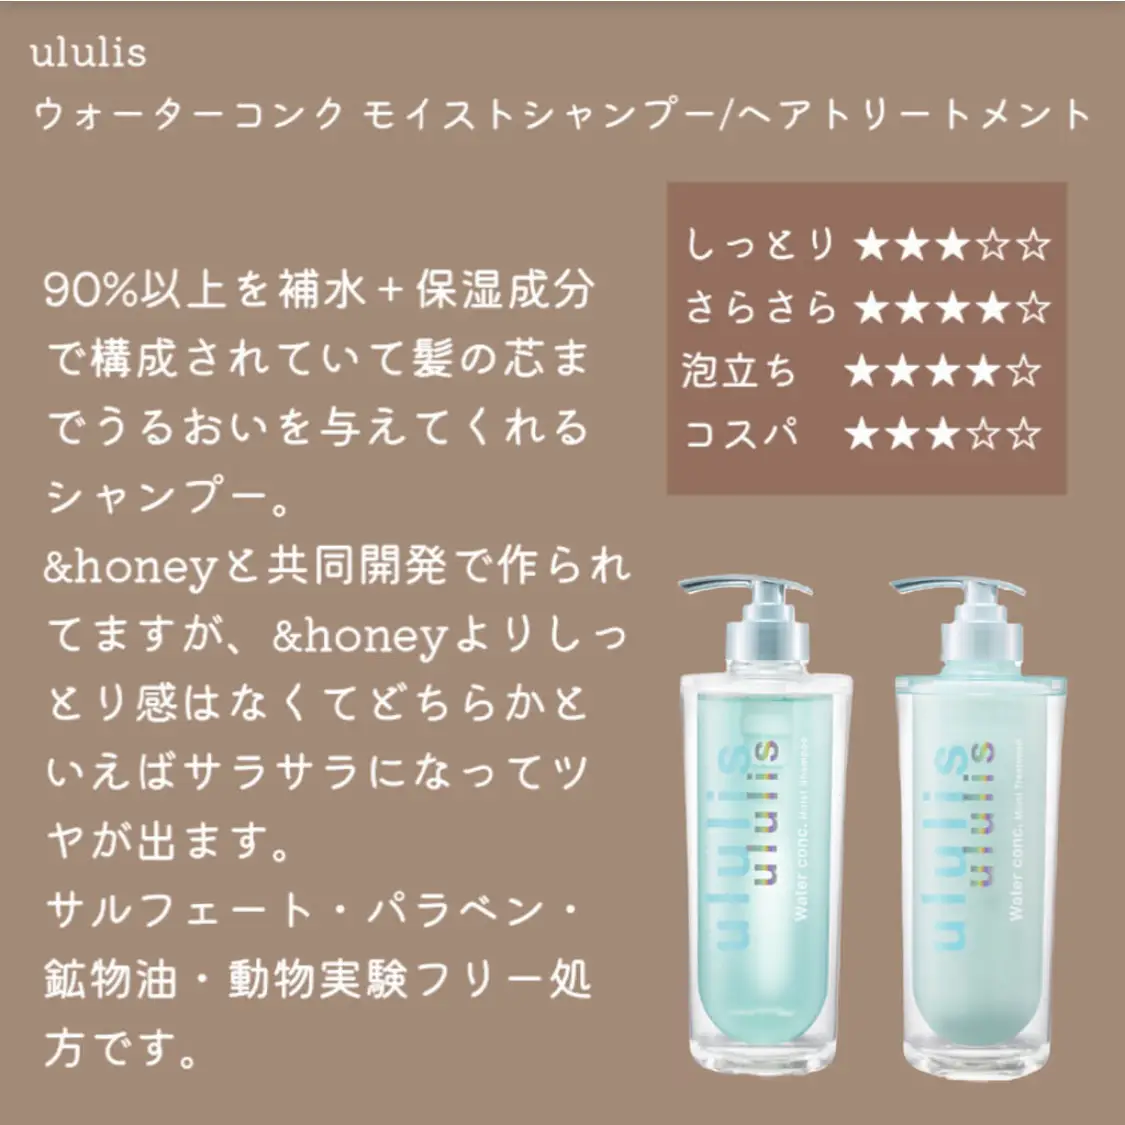 Thorough comparison of shampoos used so far   | Gallery posted